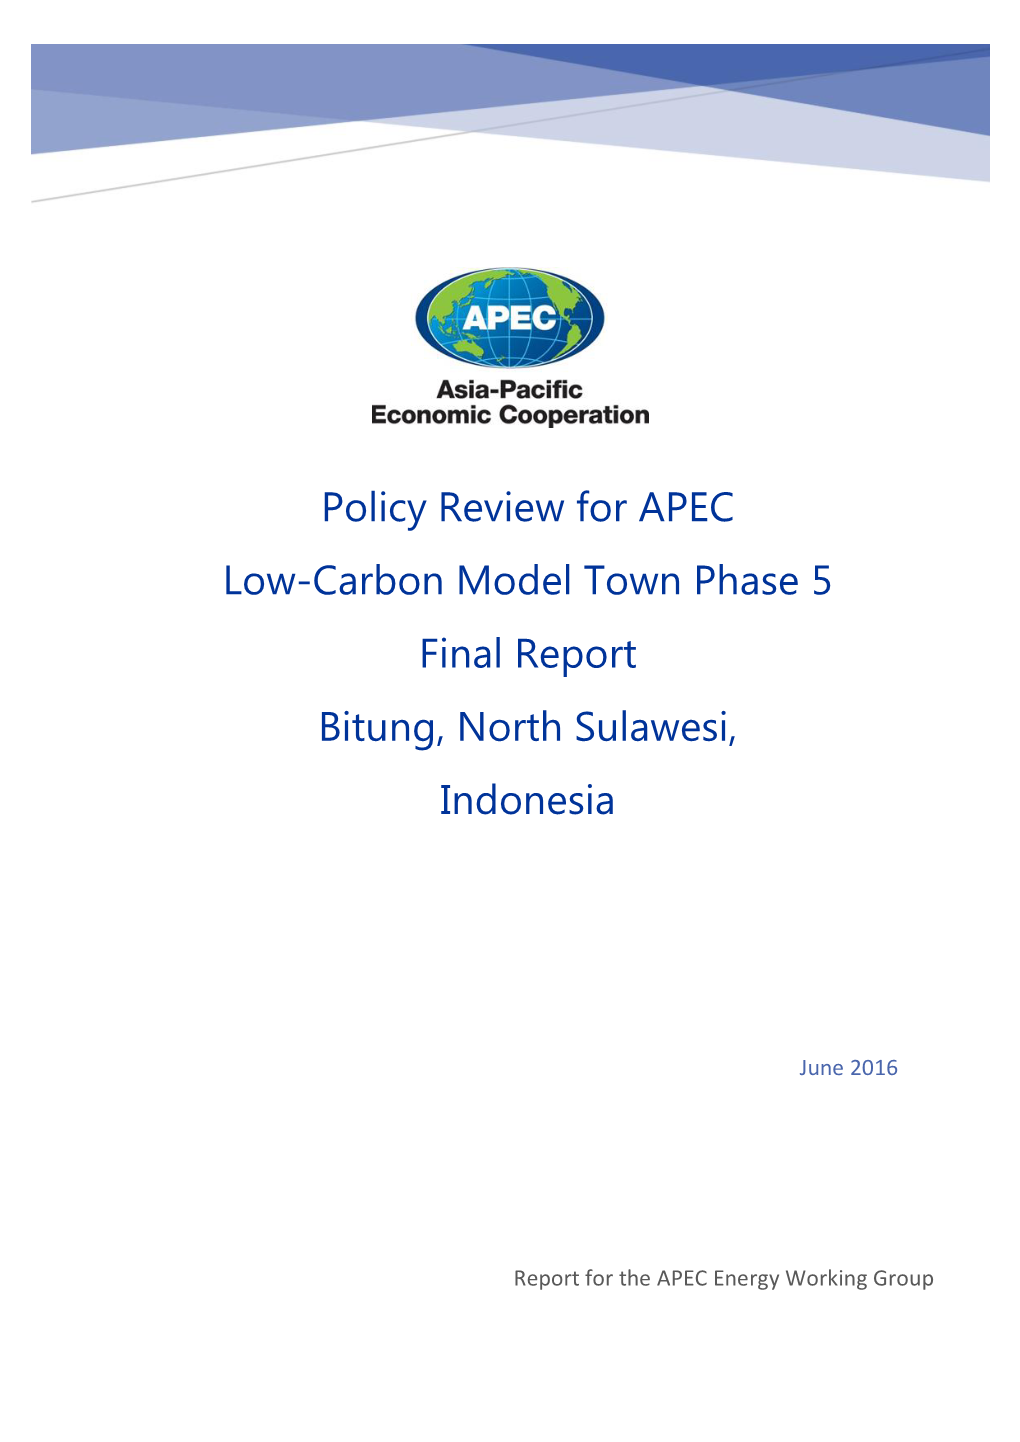 Policy Review for APEC Low-Carbon Model Town Phase 5 Final Report